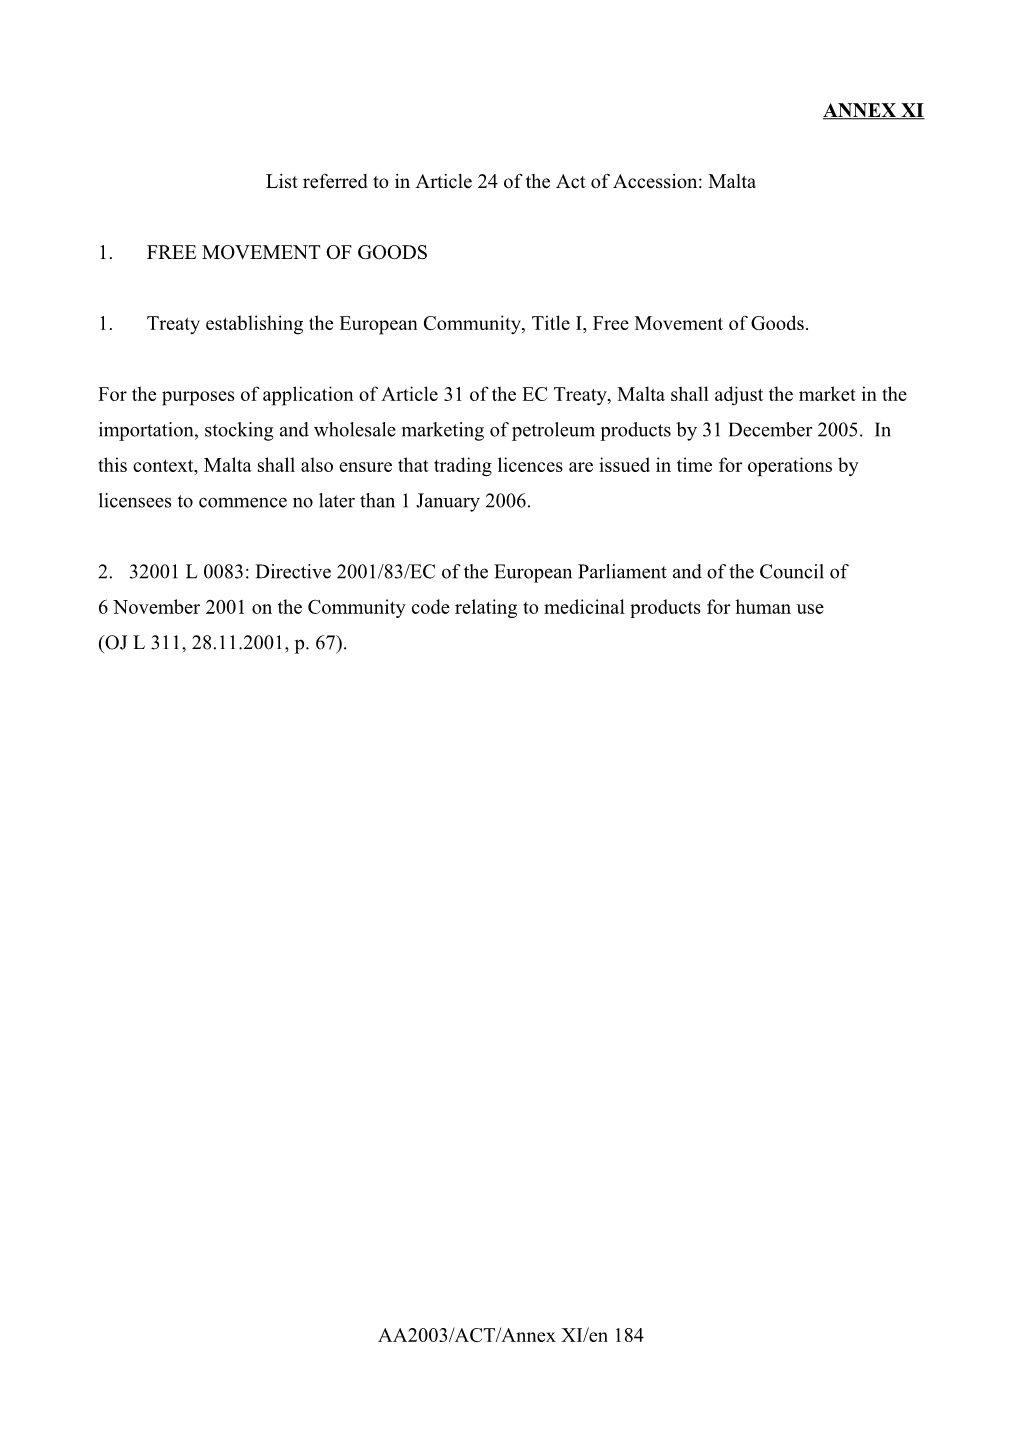 List Referred to in Article 24 of the Act of Accession: Malta